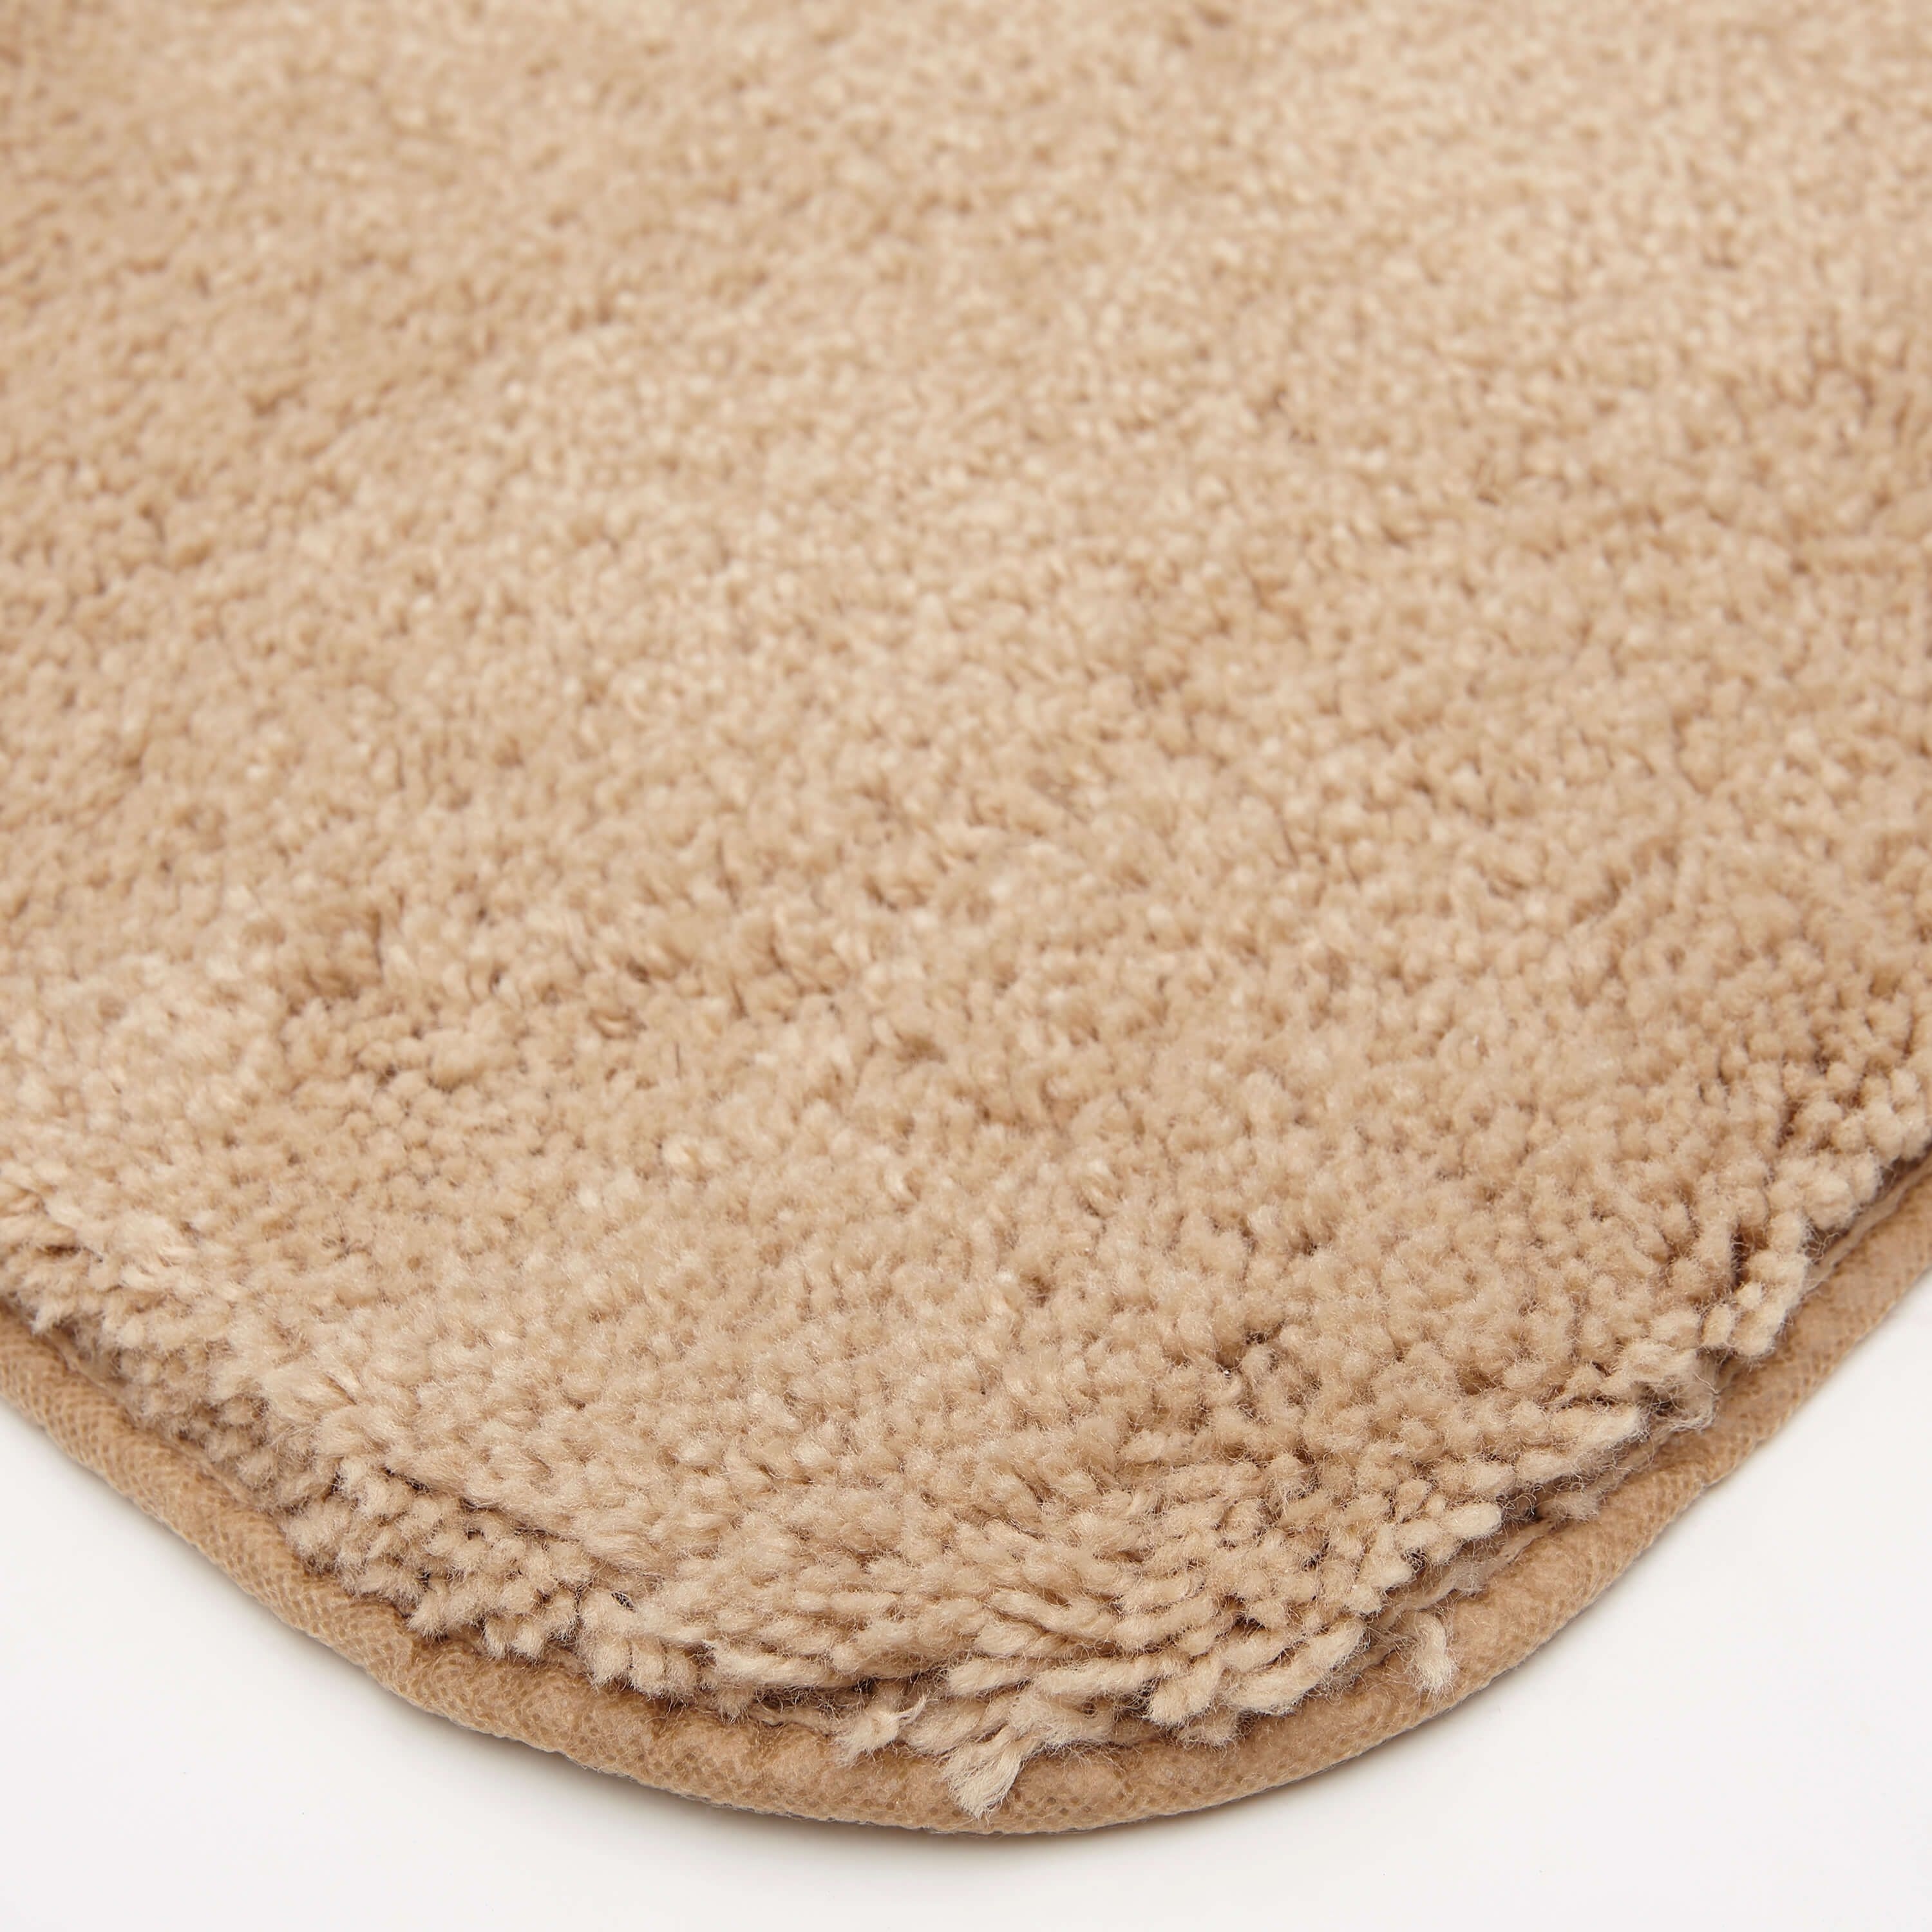 https://ak1.ostkcdn.com/images/products/is/images/direct/b03b9c0093454d6e8e8247dc593e7825428dcc84/Mohawk-Home-Pure-Perfection-Solid-Patterned-Bath-Rug.jpg